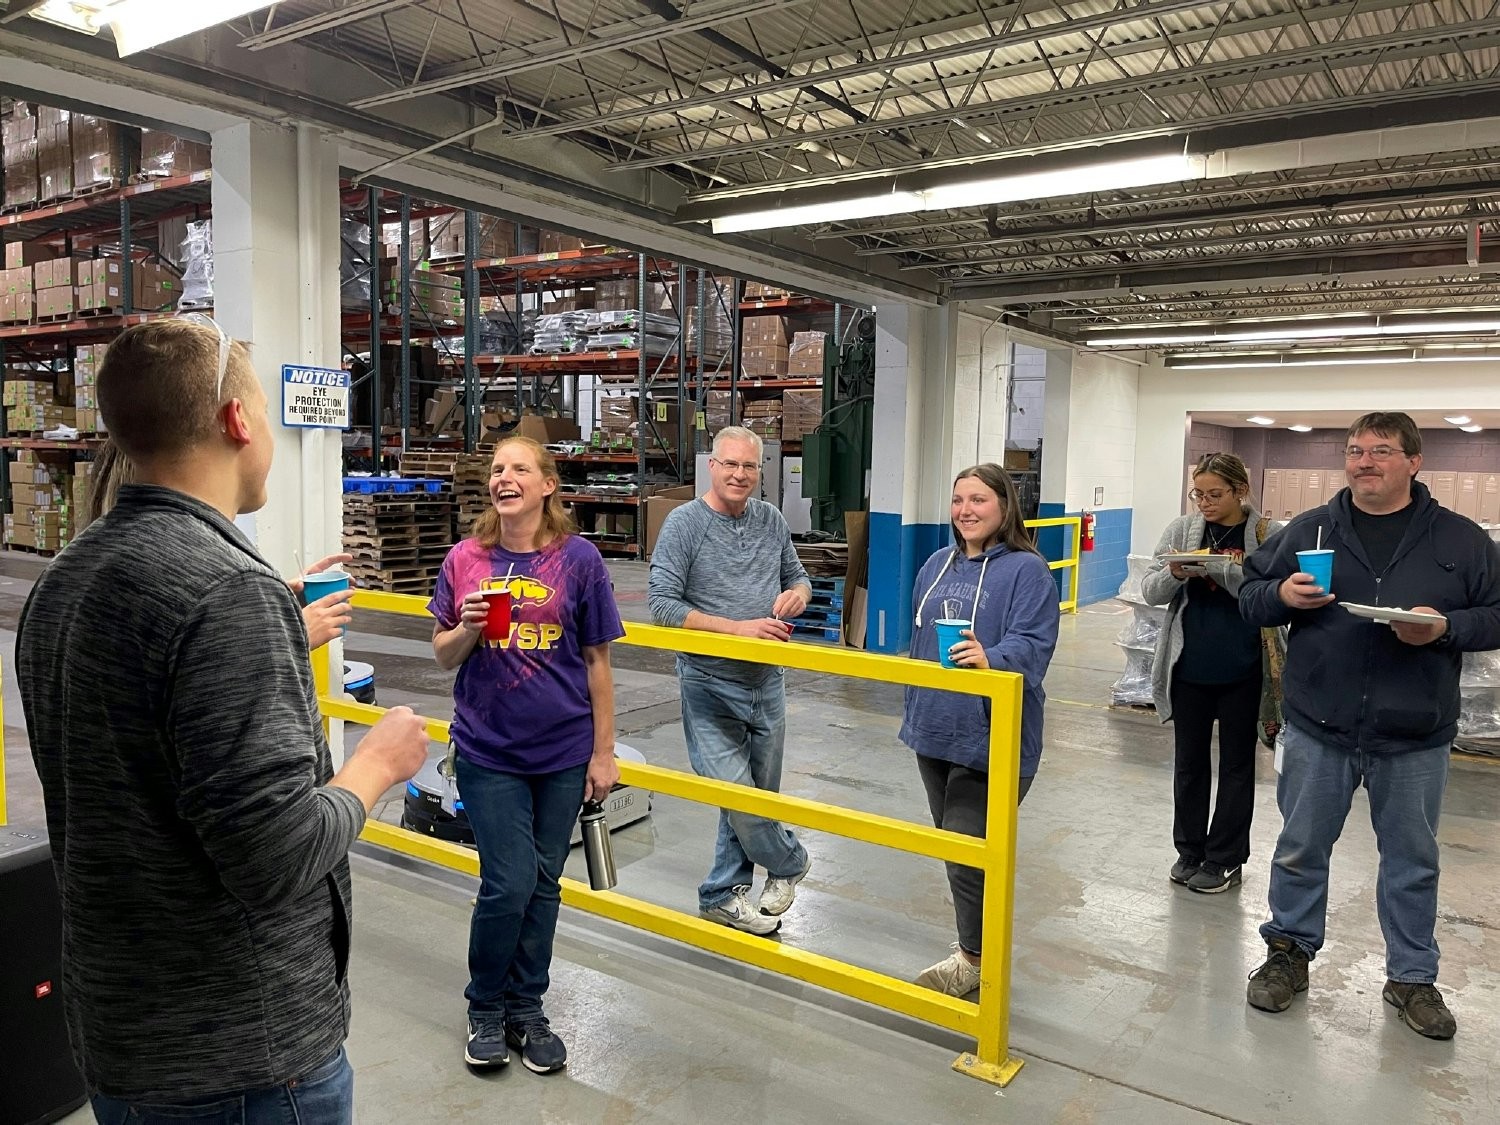 Giving a tour during the annual Connect 4 Tomorrow event where we host suppliers and customers!